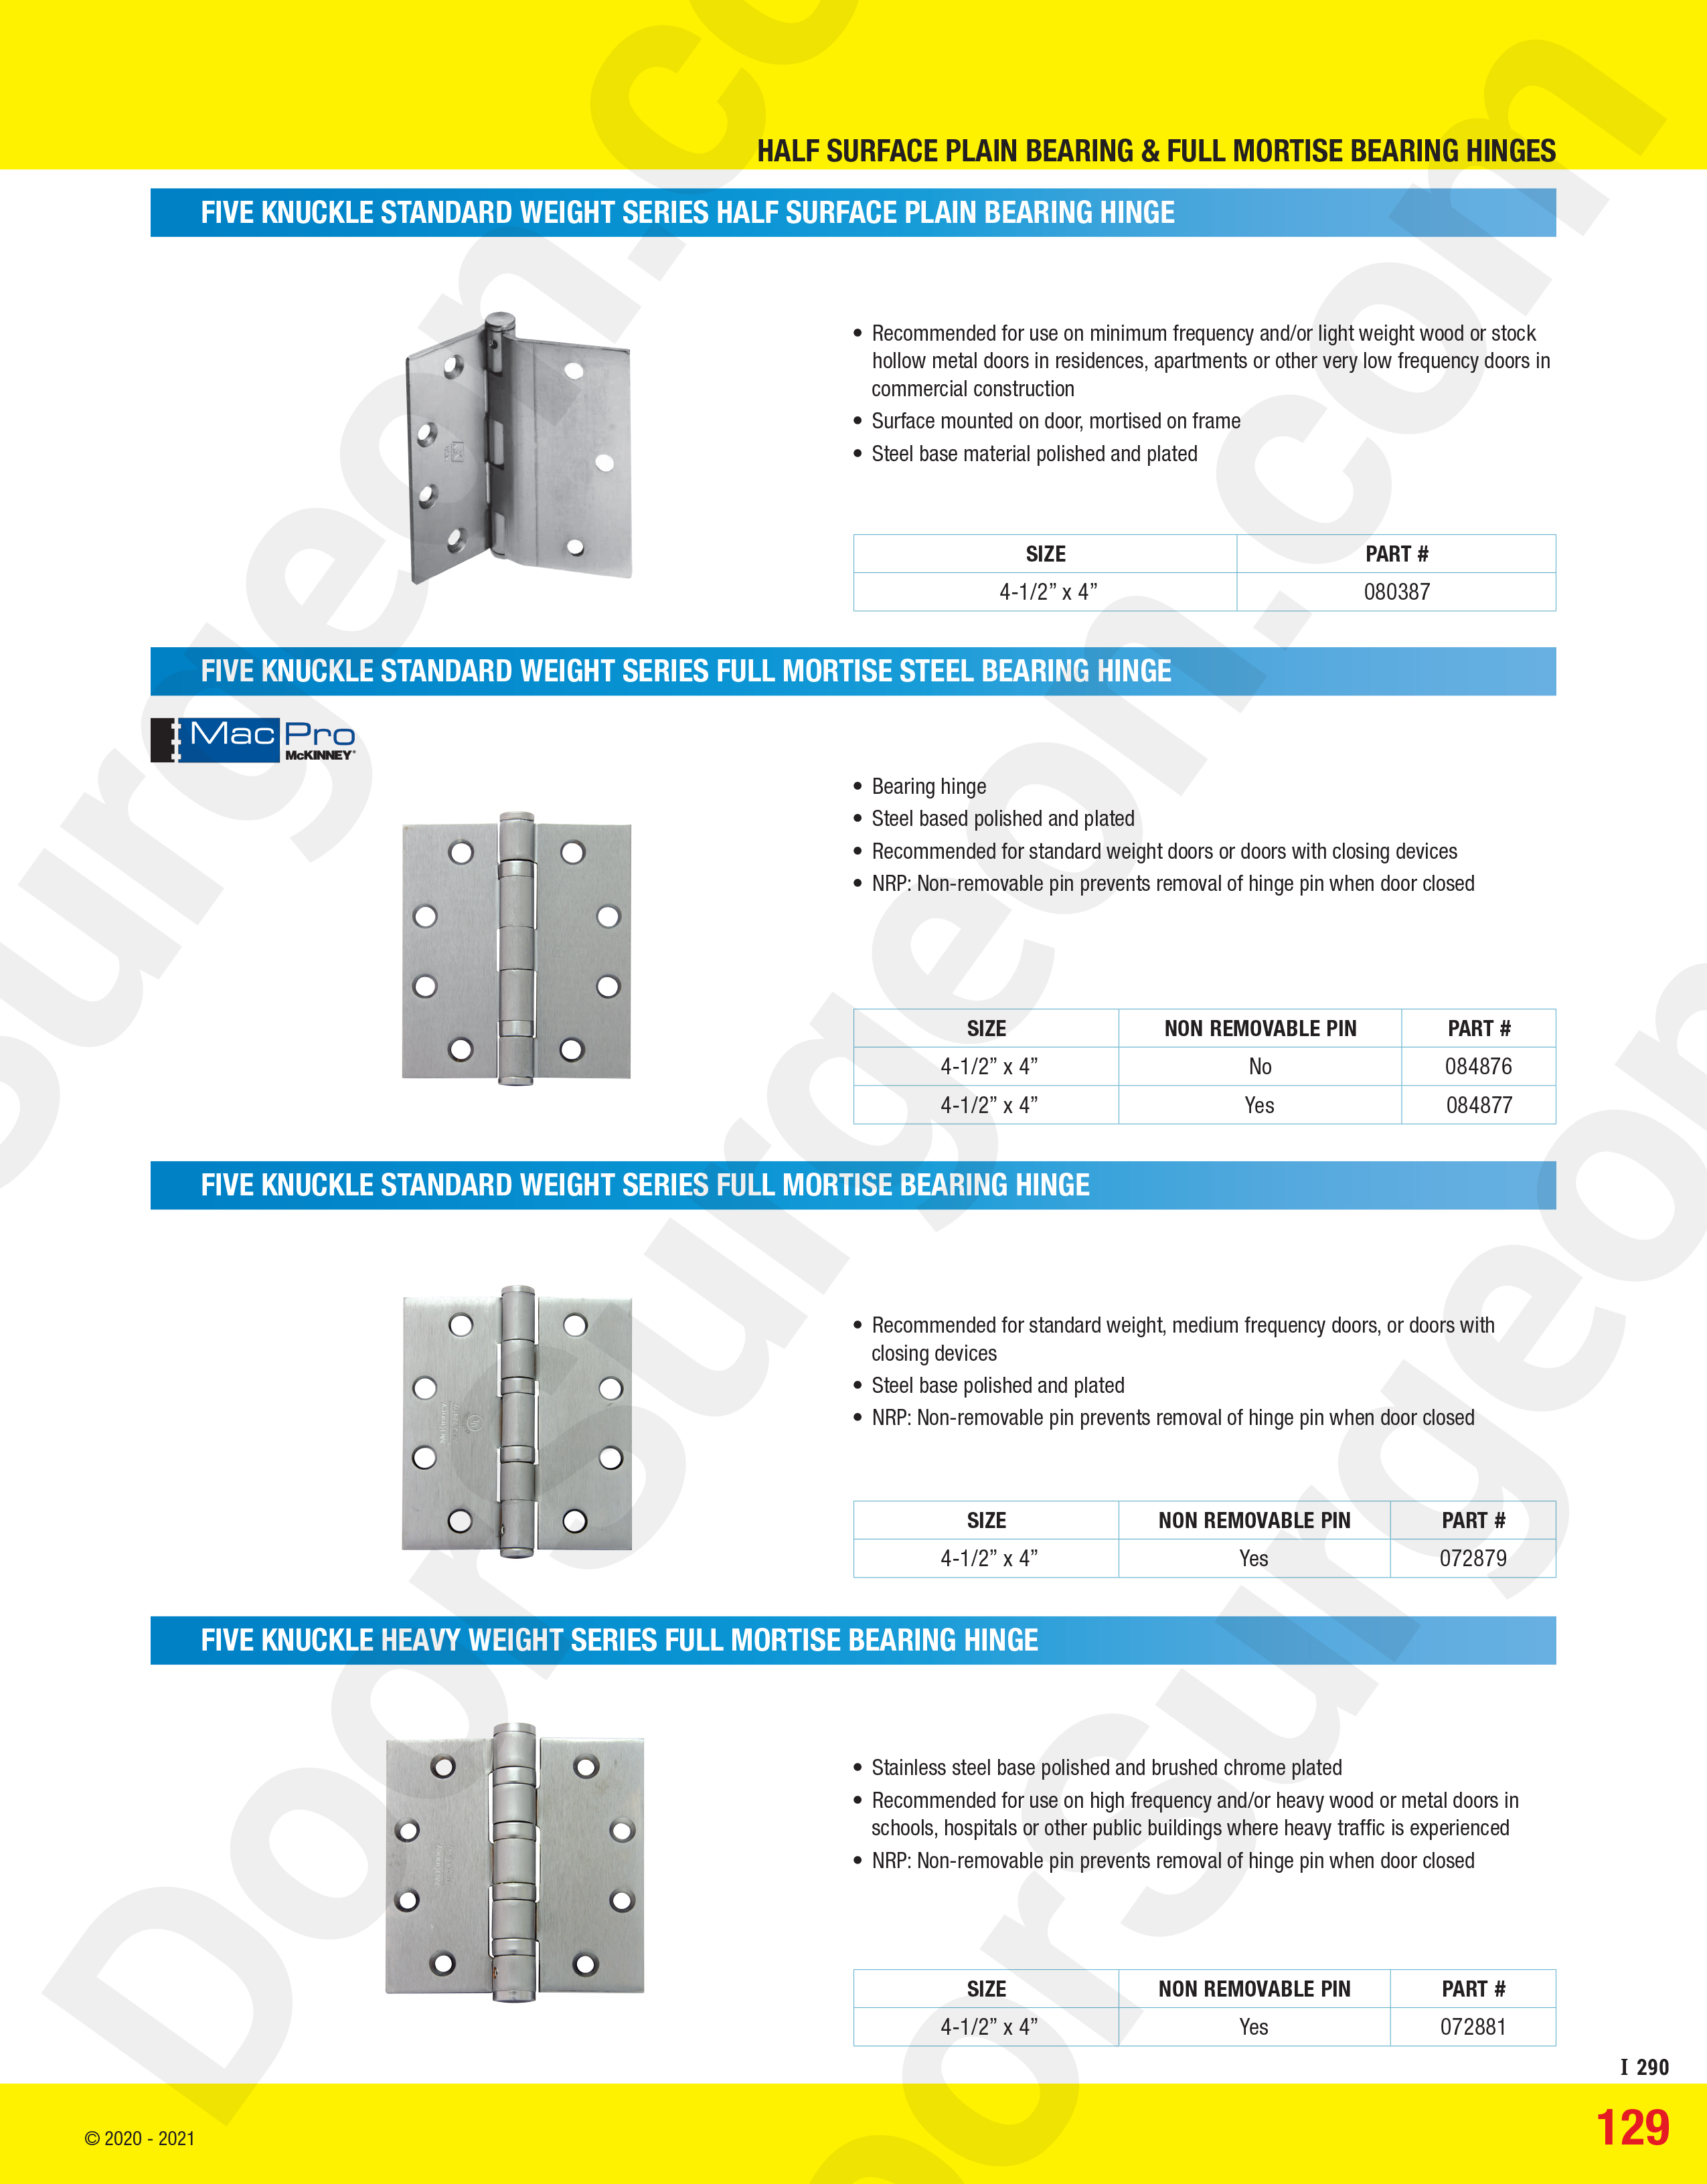 Half-surface plain bearing and full mortise bearing hinges sales and installations.